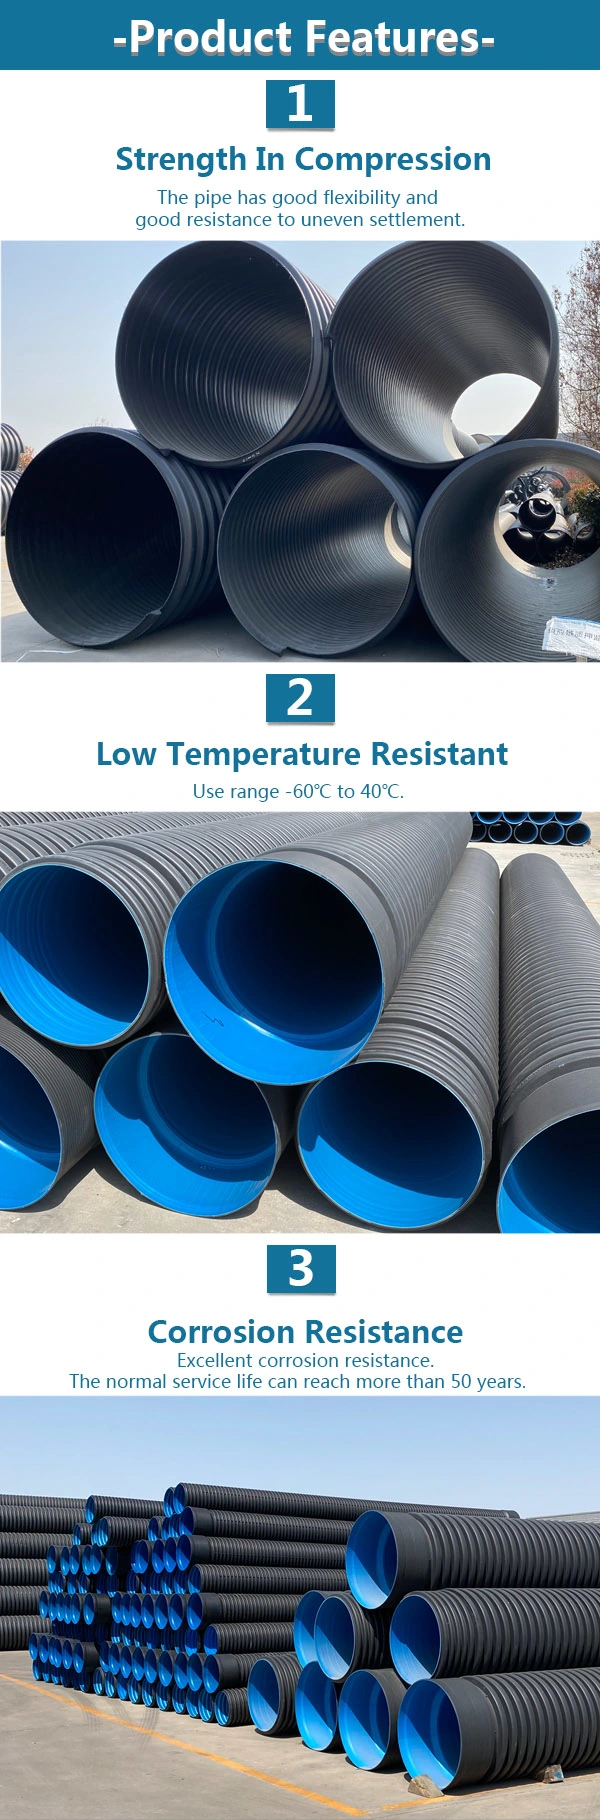 500mm HDPE Double Wall Corrugated Pipe for Culvert Drainage Wholesale Price